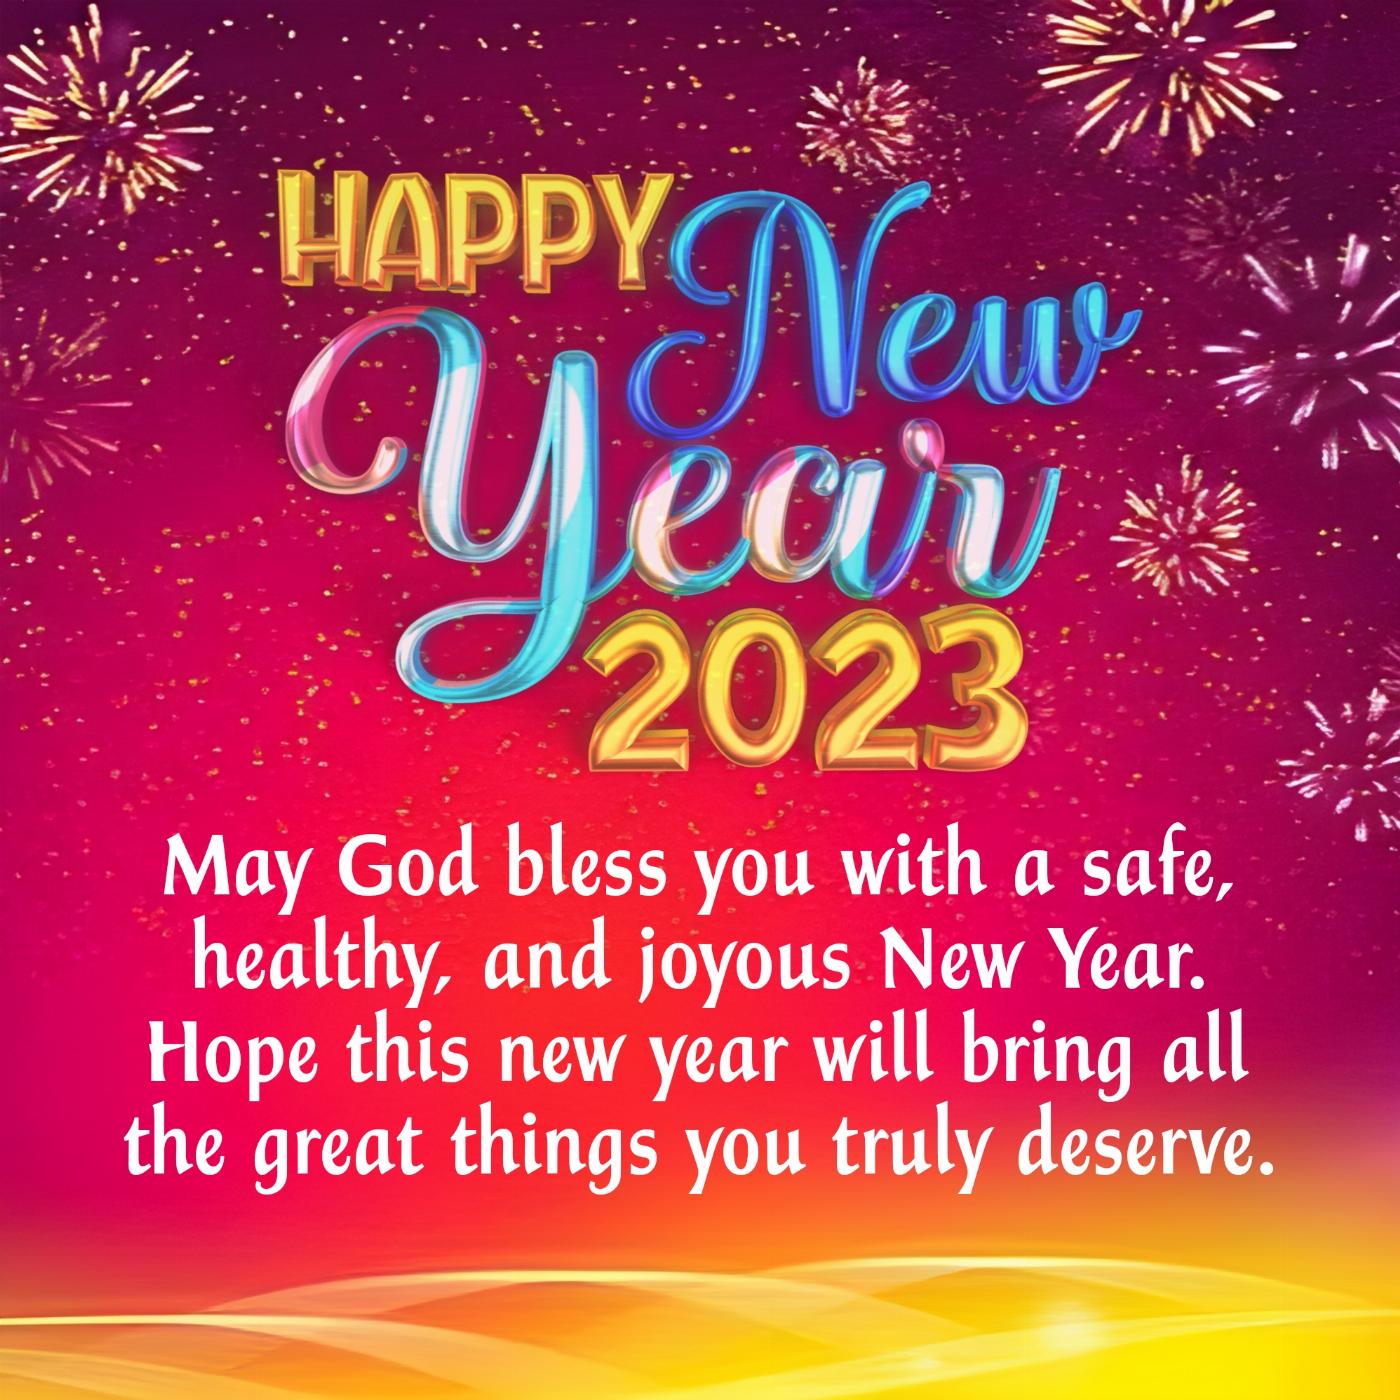 May God bless you with a safe healthy and joyous New Year